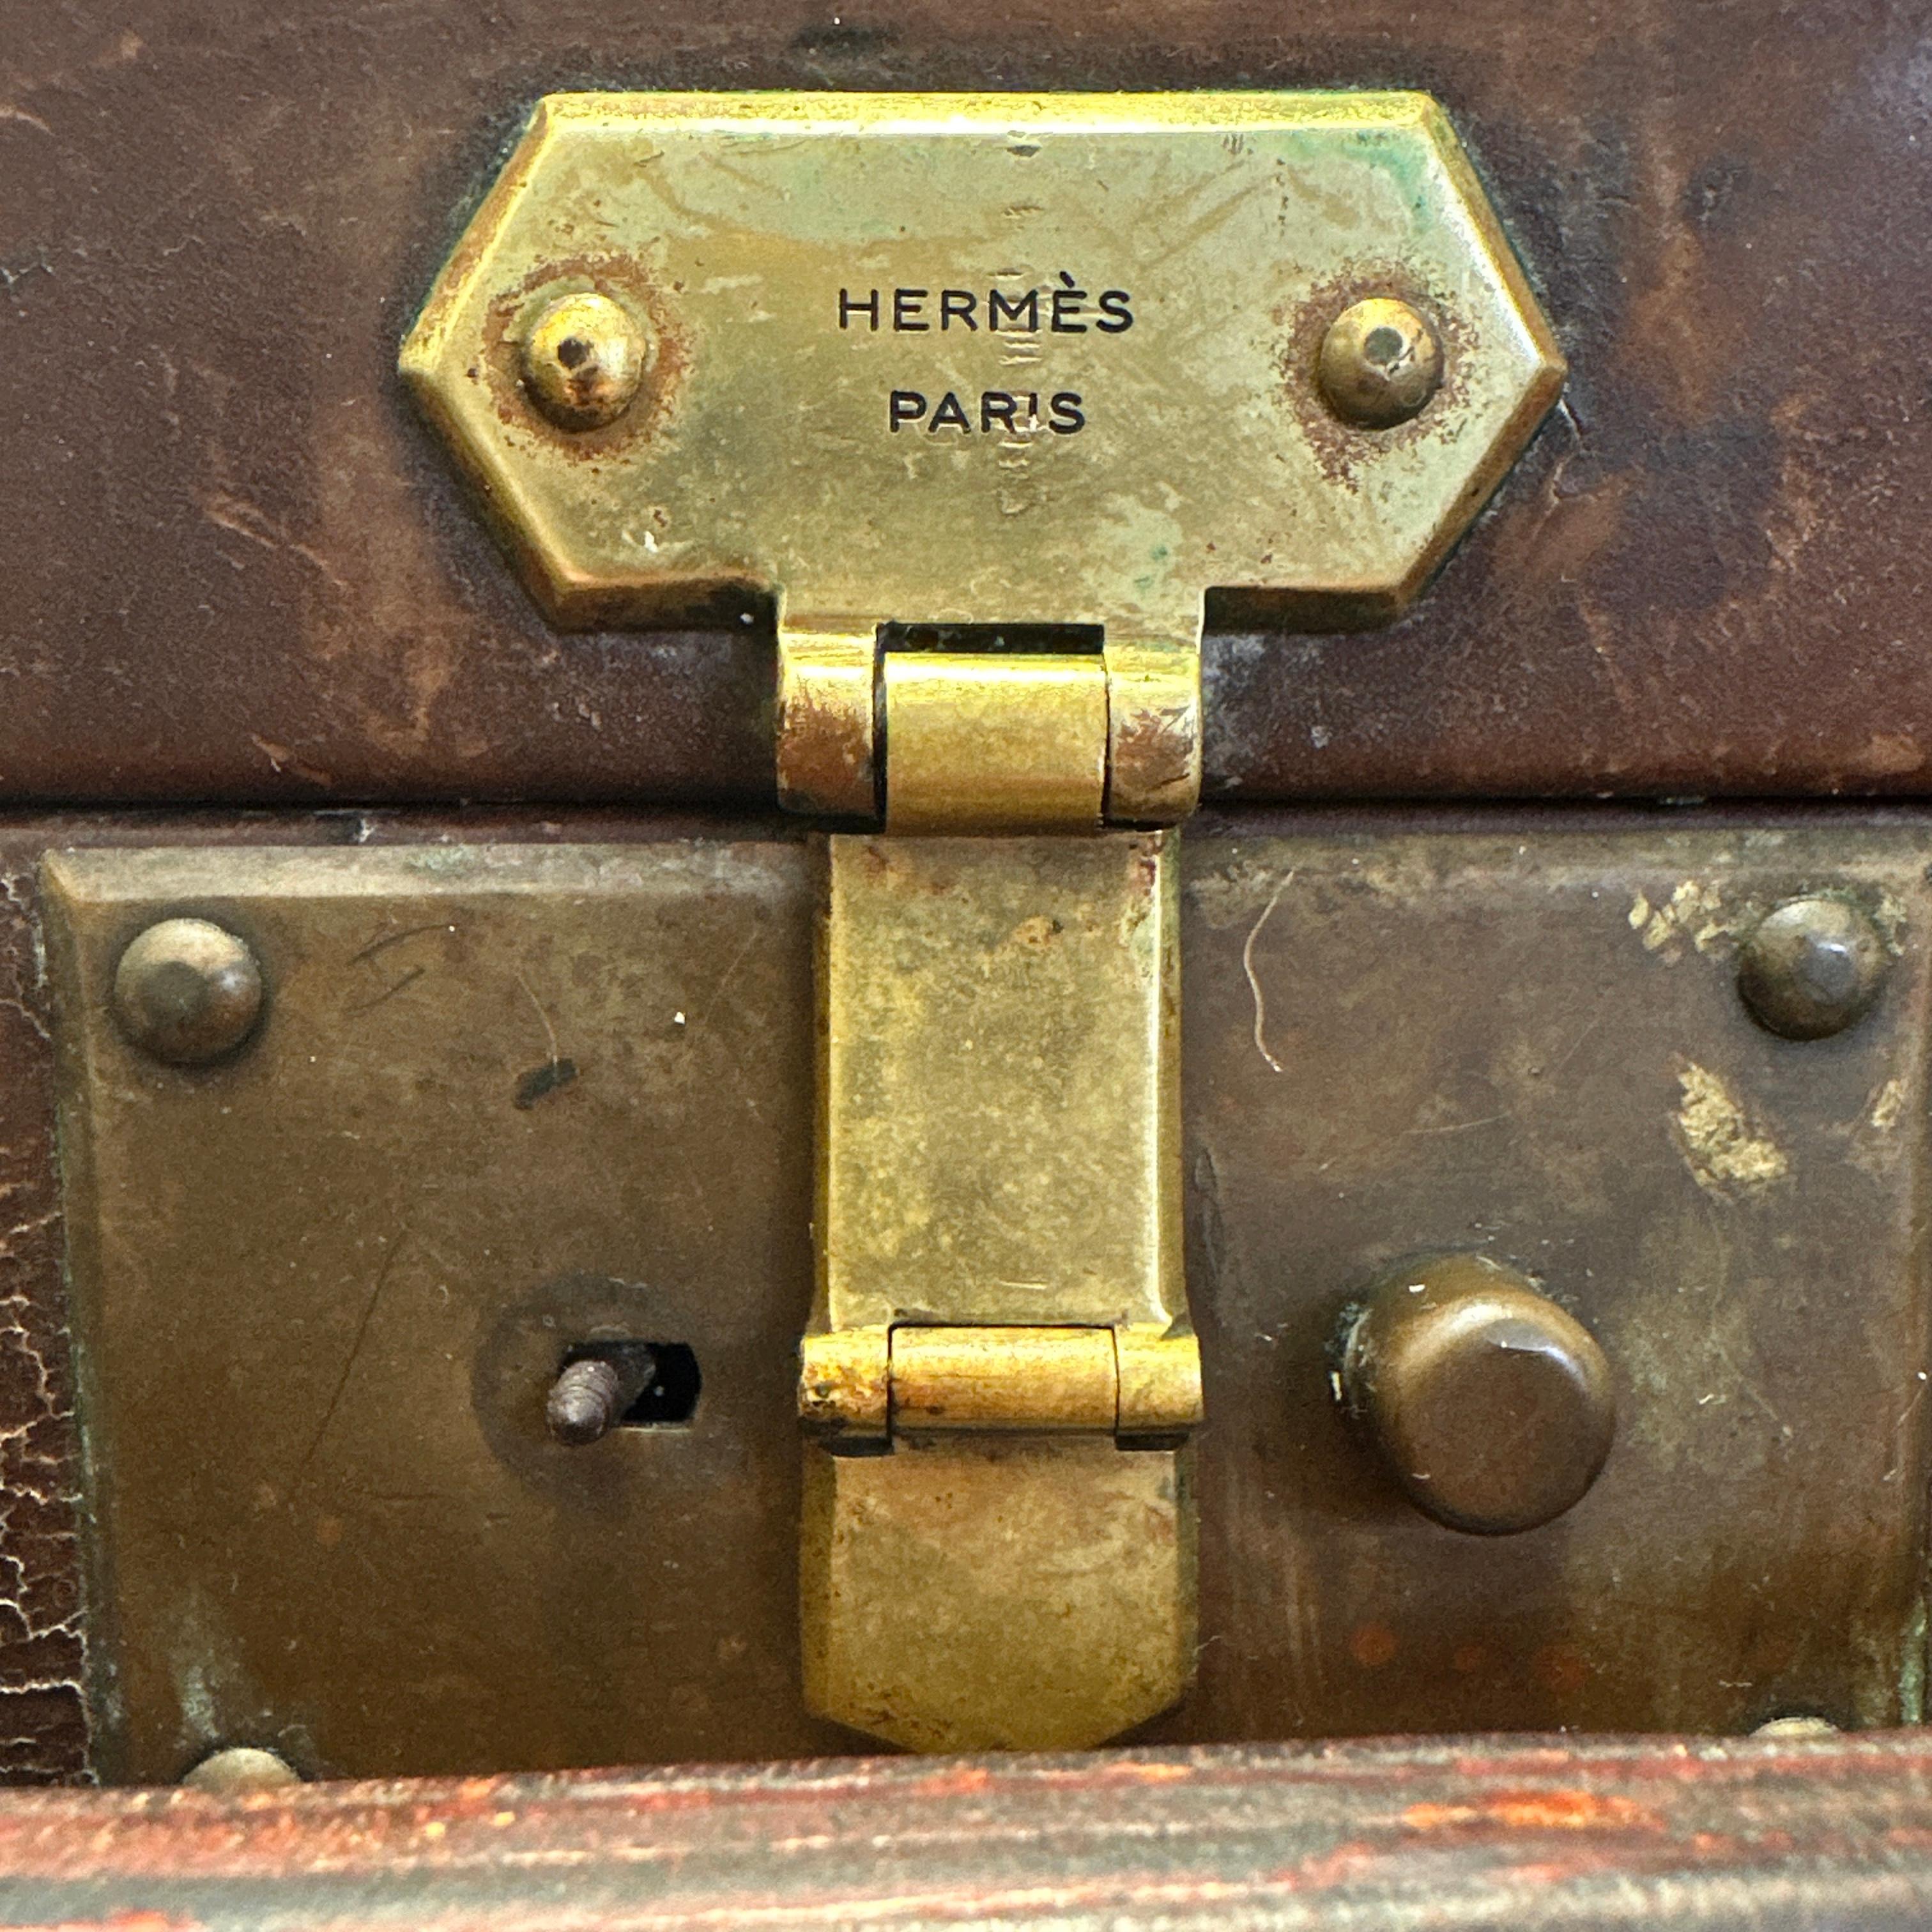 Here is a beautiful and Rare Vintage Hermes Leather Suitcase. This handsome piece of luggage is in overall good condition for its age with wear consistent with age and use as seen in the pictures. A new handle has just been installed as well as the